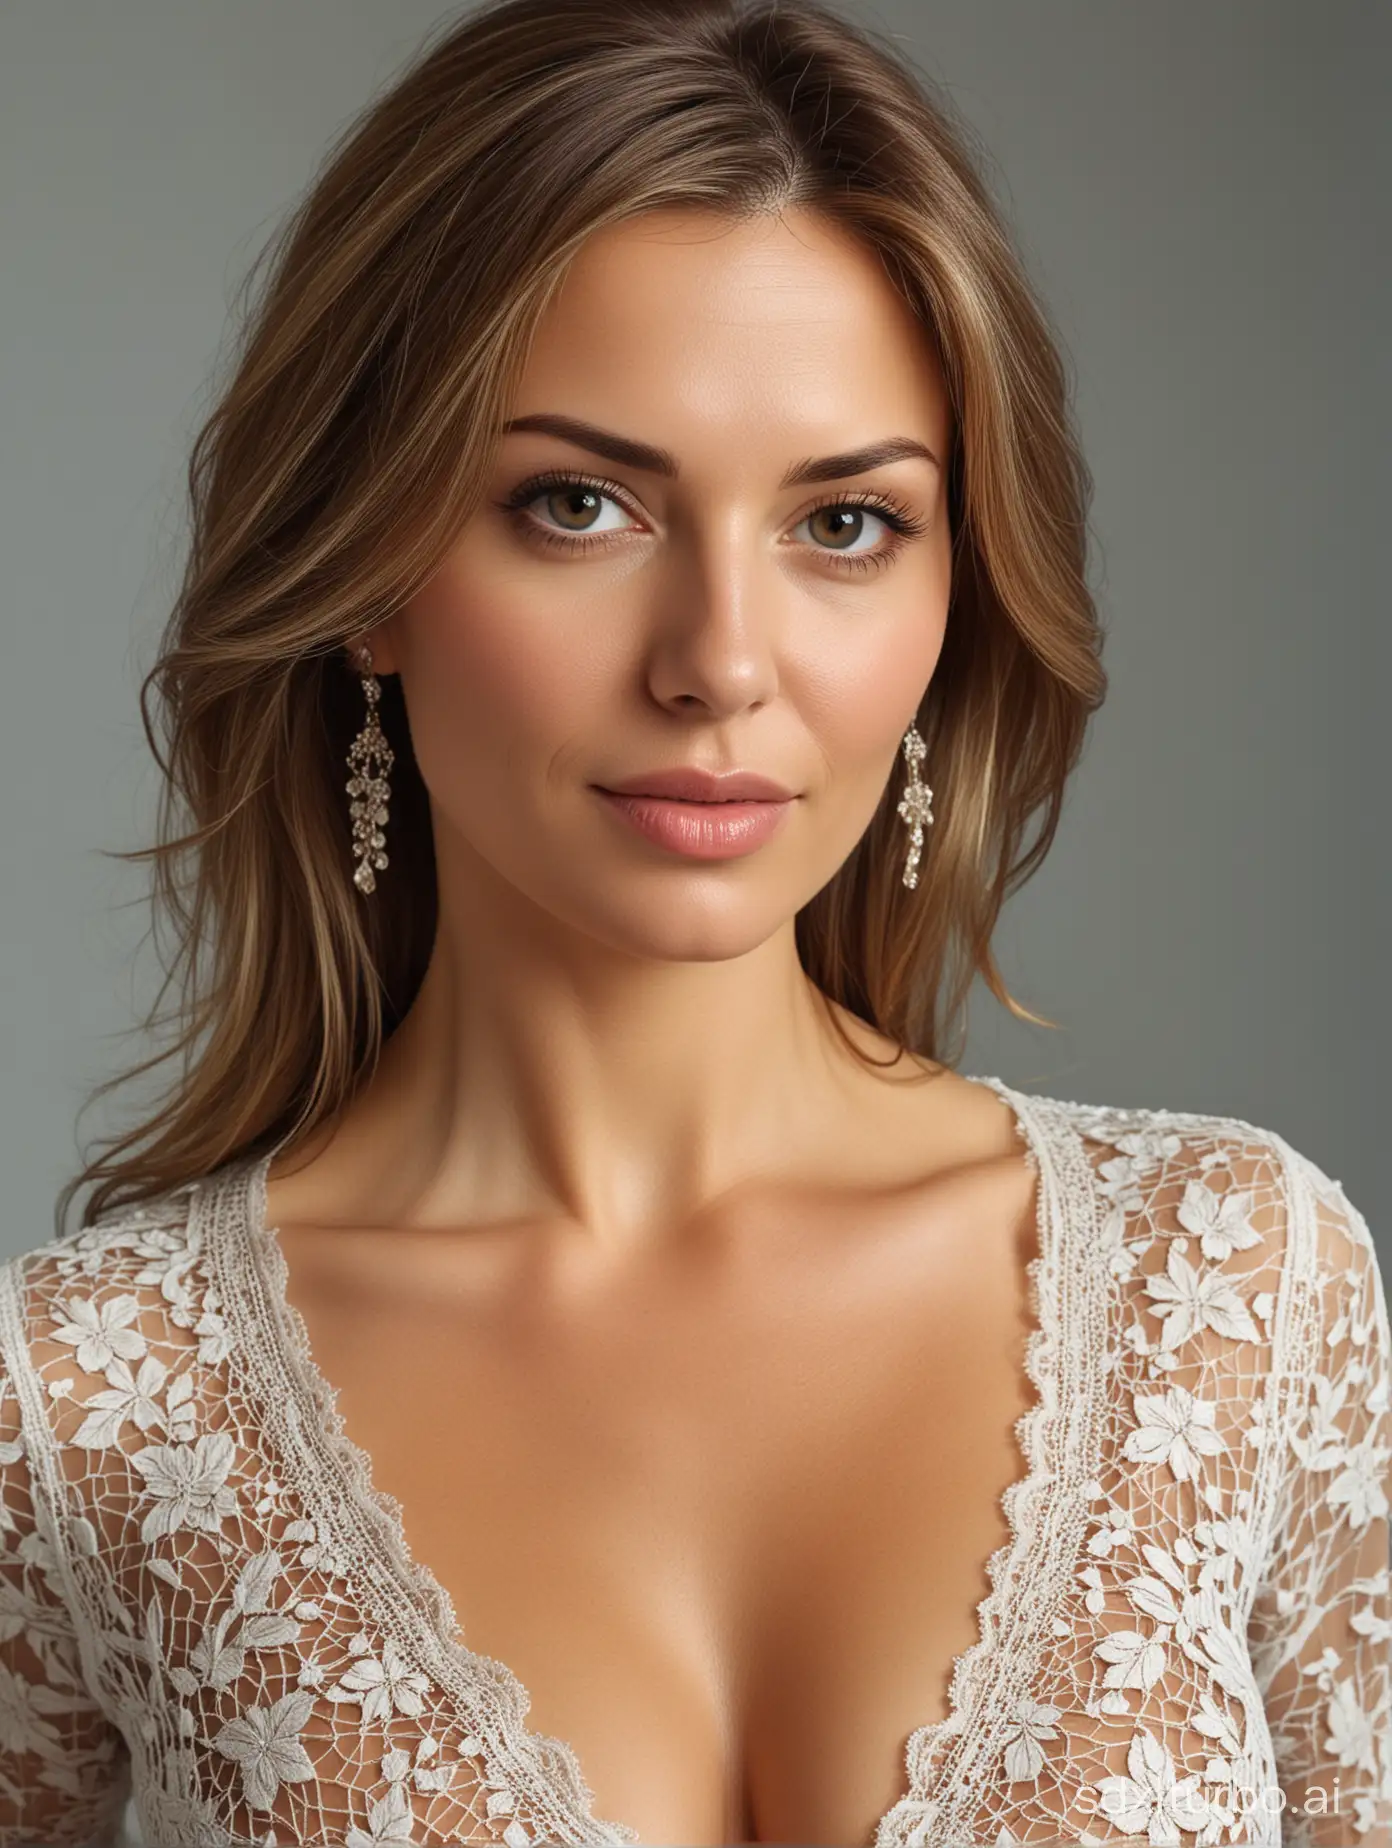 Beautiful European woman, 40 years old, beautiful and detailed face, beautiful and full breasts, well-cut blouse, masterpiece, intricate details, best quality, best focus, best angle, best sharpness, well-made-up face, half body, magnificent image that will take your eye off breath